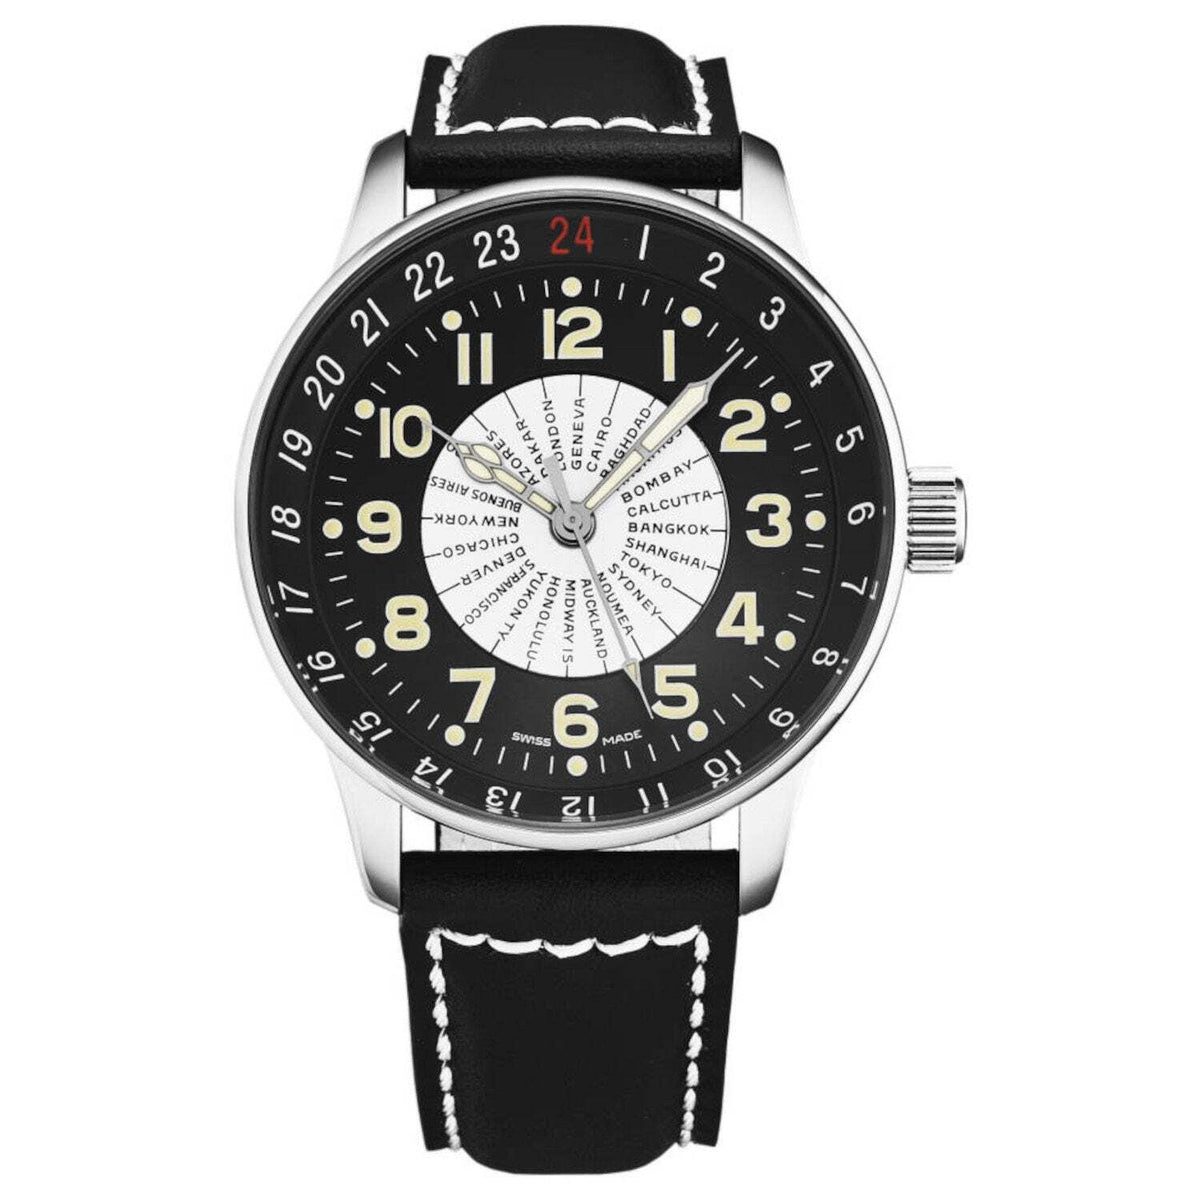 Zeno P554WT-B1 Men's P554WT-B1 'Pilot' X-Large world timer Limited Edition Black Dial Black/White Leather Strap Automatic Watch